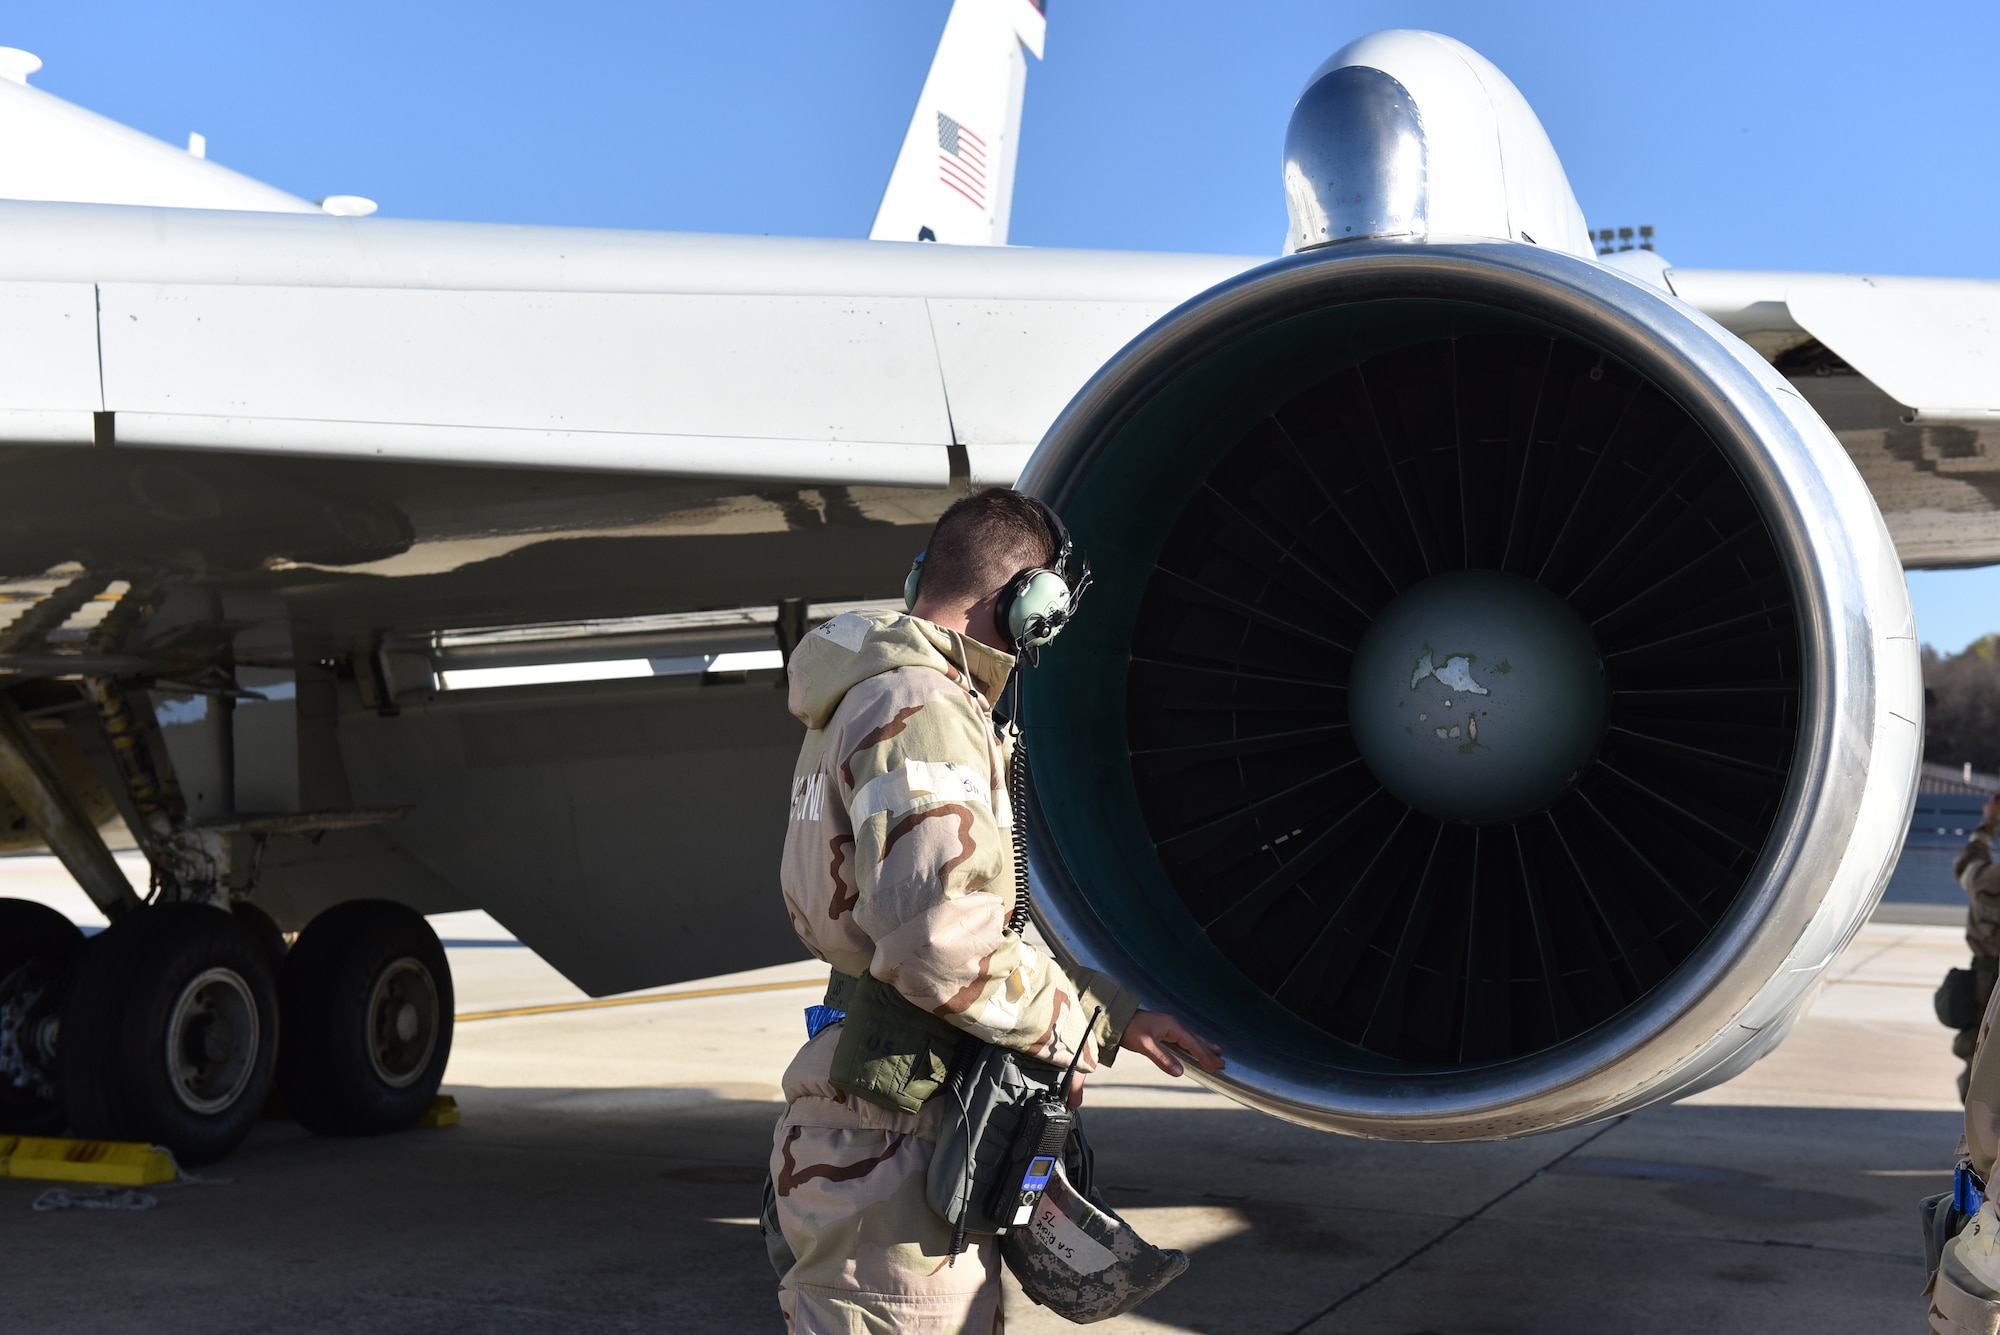 Photo shows an Airman looking into the intake of an aircraft.